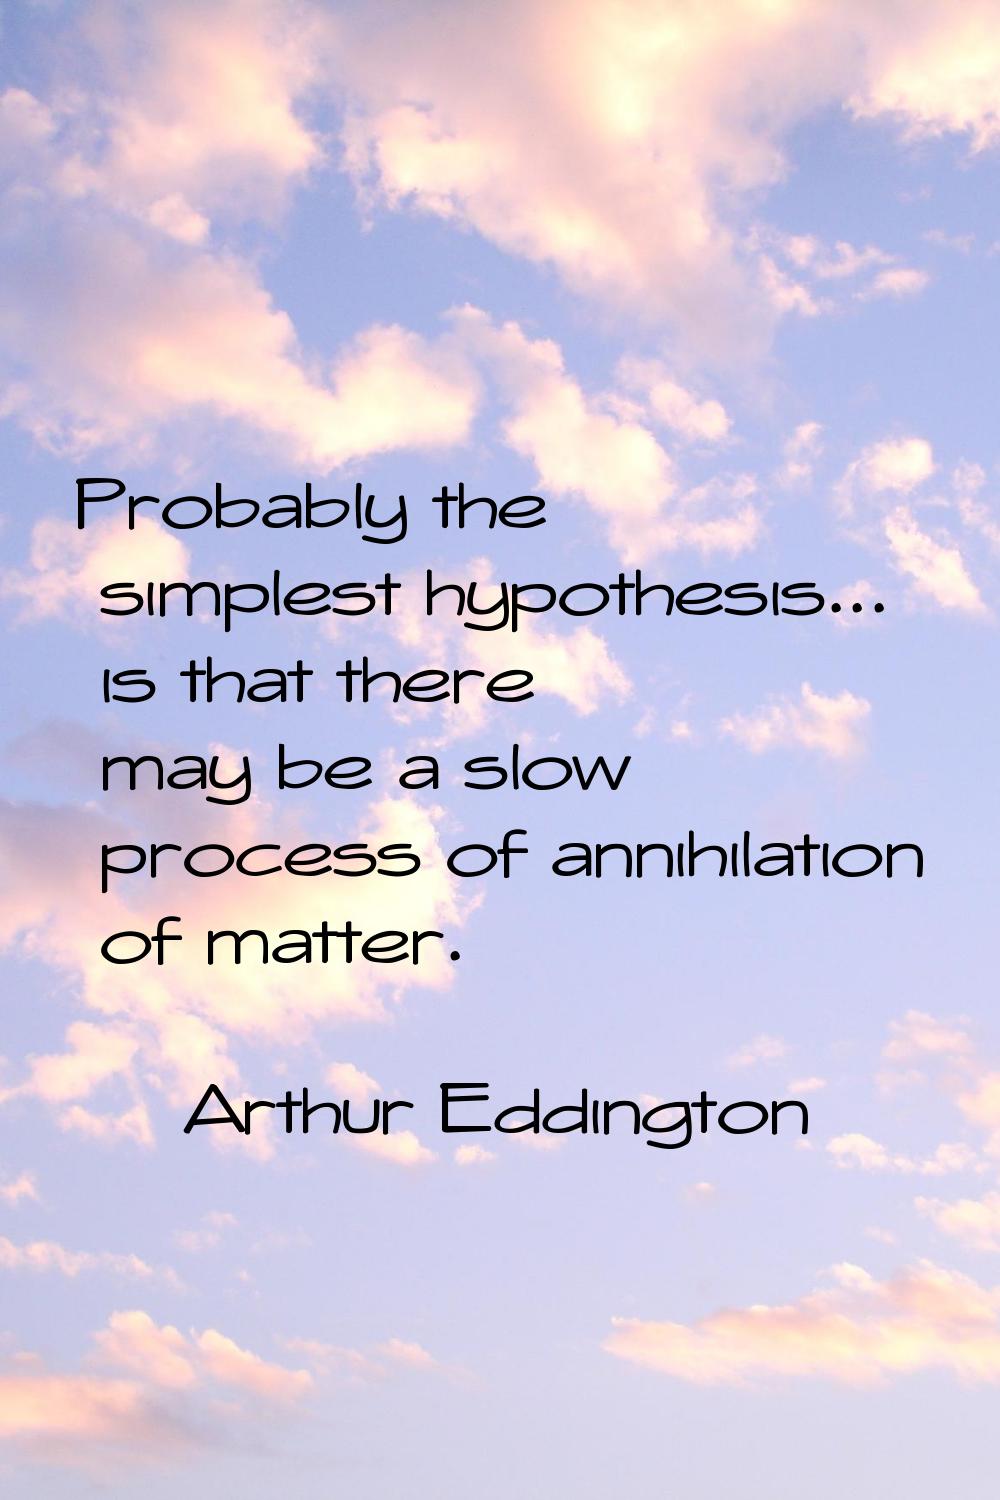 Probably the simplest hypothesis... is that there may be a slow process of annihilation of matter.